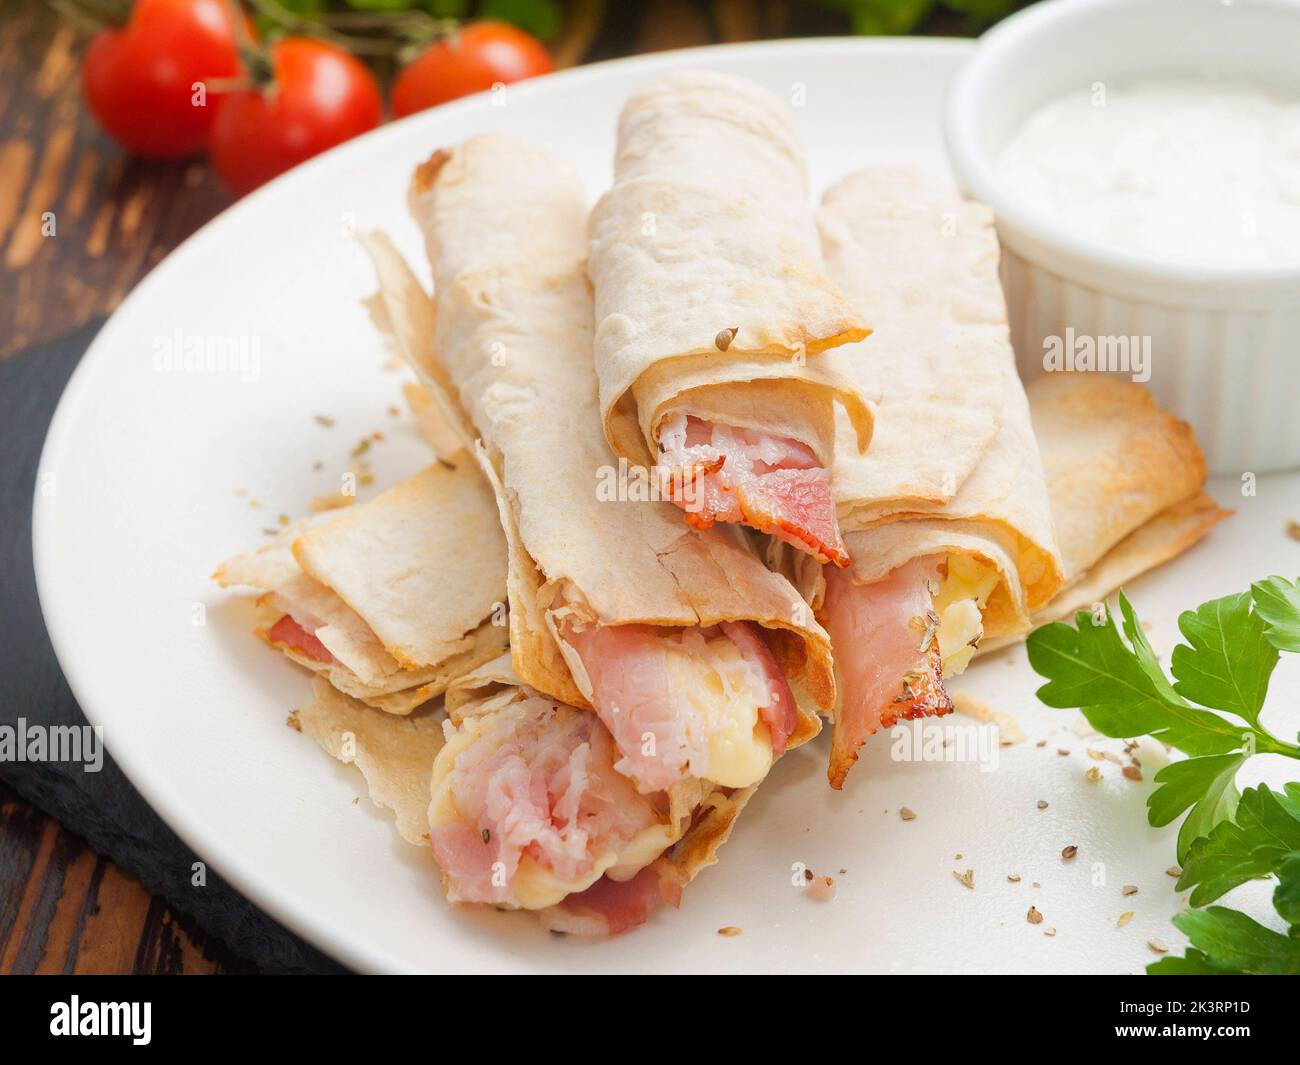 tasty pita bread rolls with cheese and bacon and white sauce. Selected focus. Stock Photo